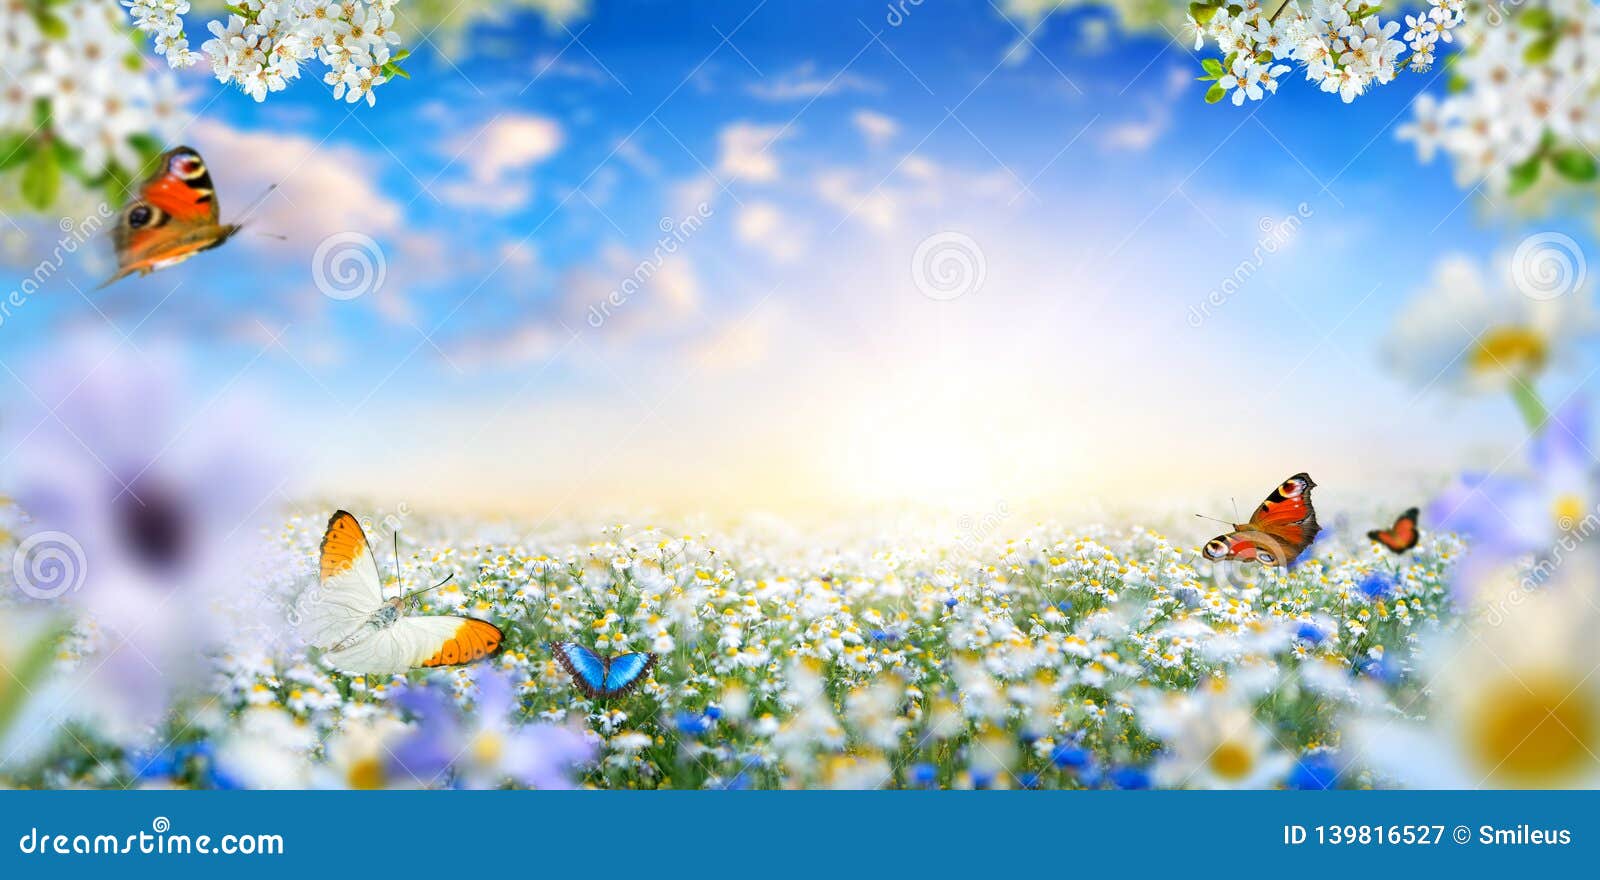 dreamland fantasy spring landscape with flowers and butterflies